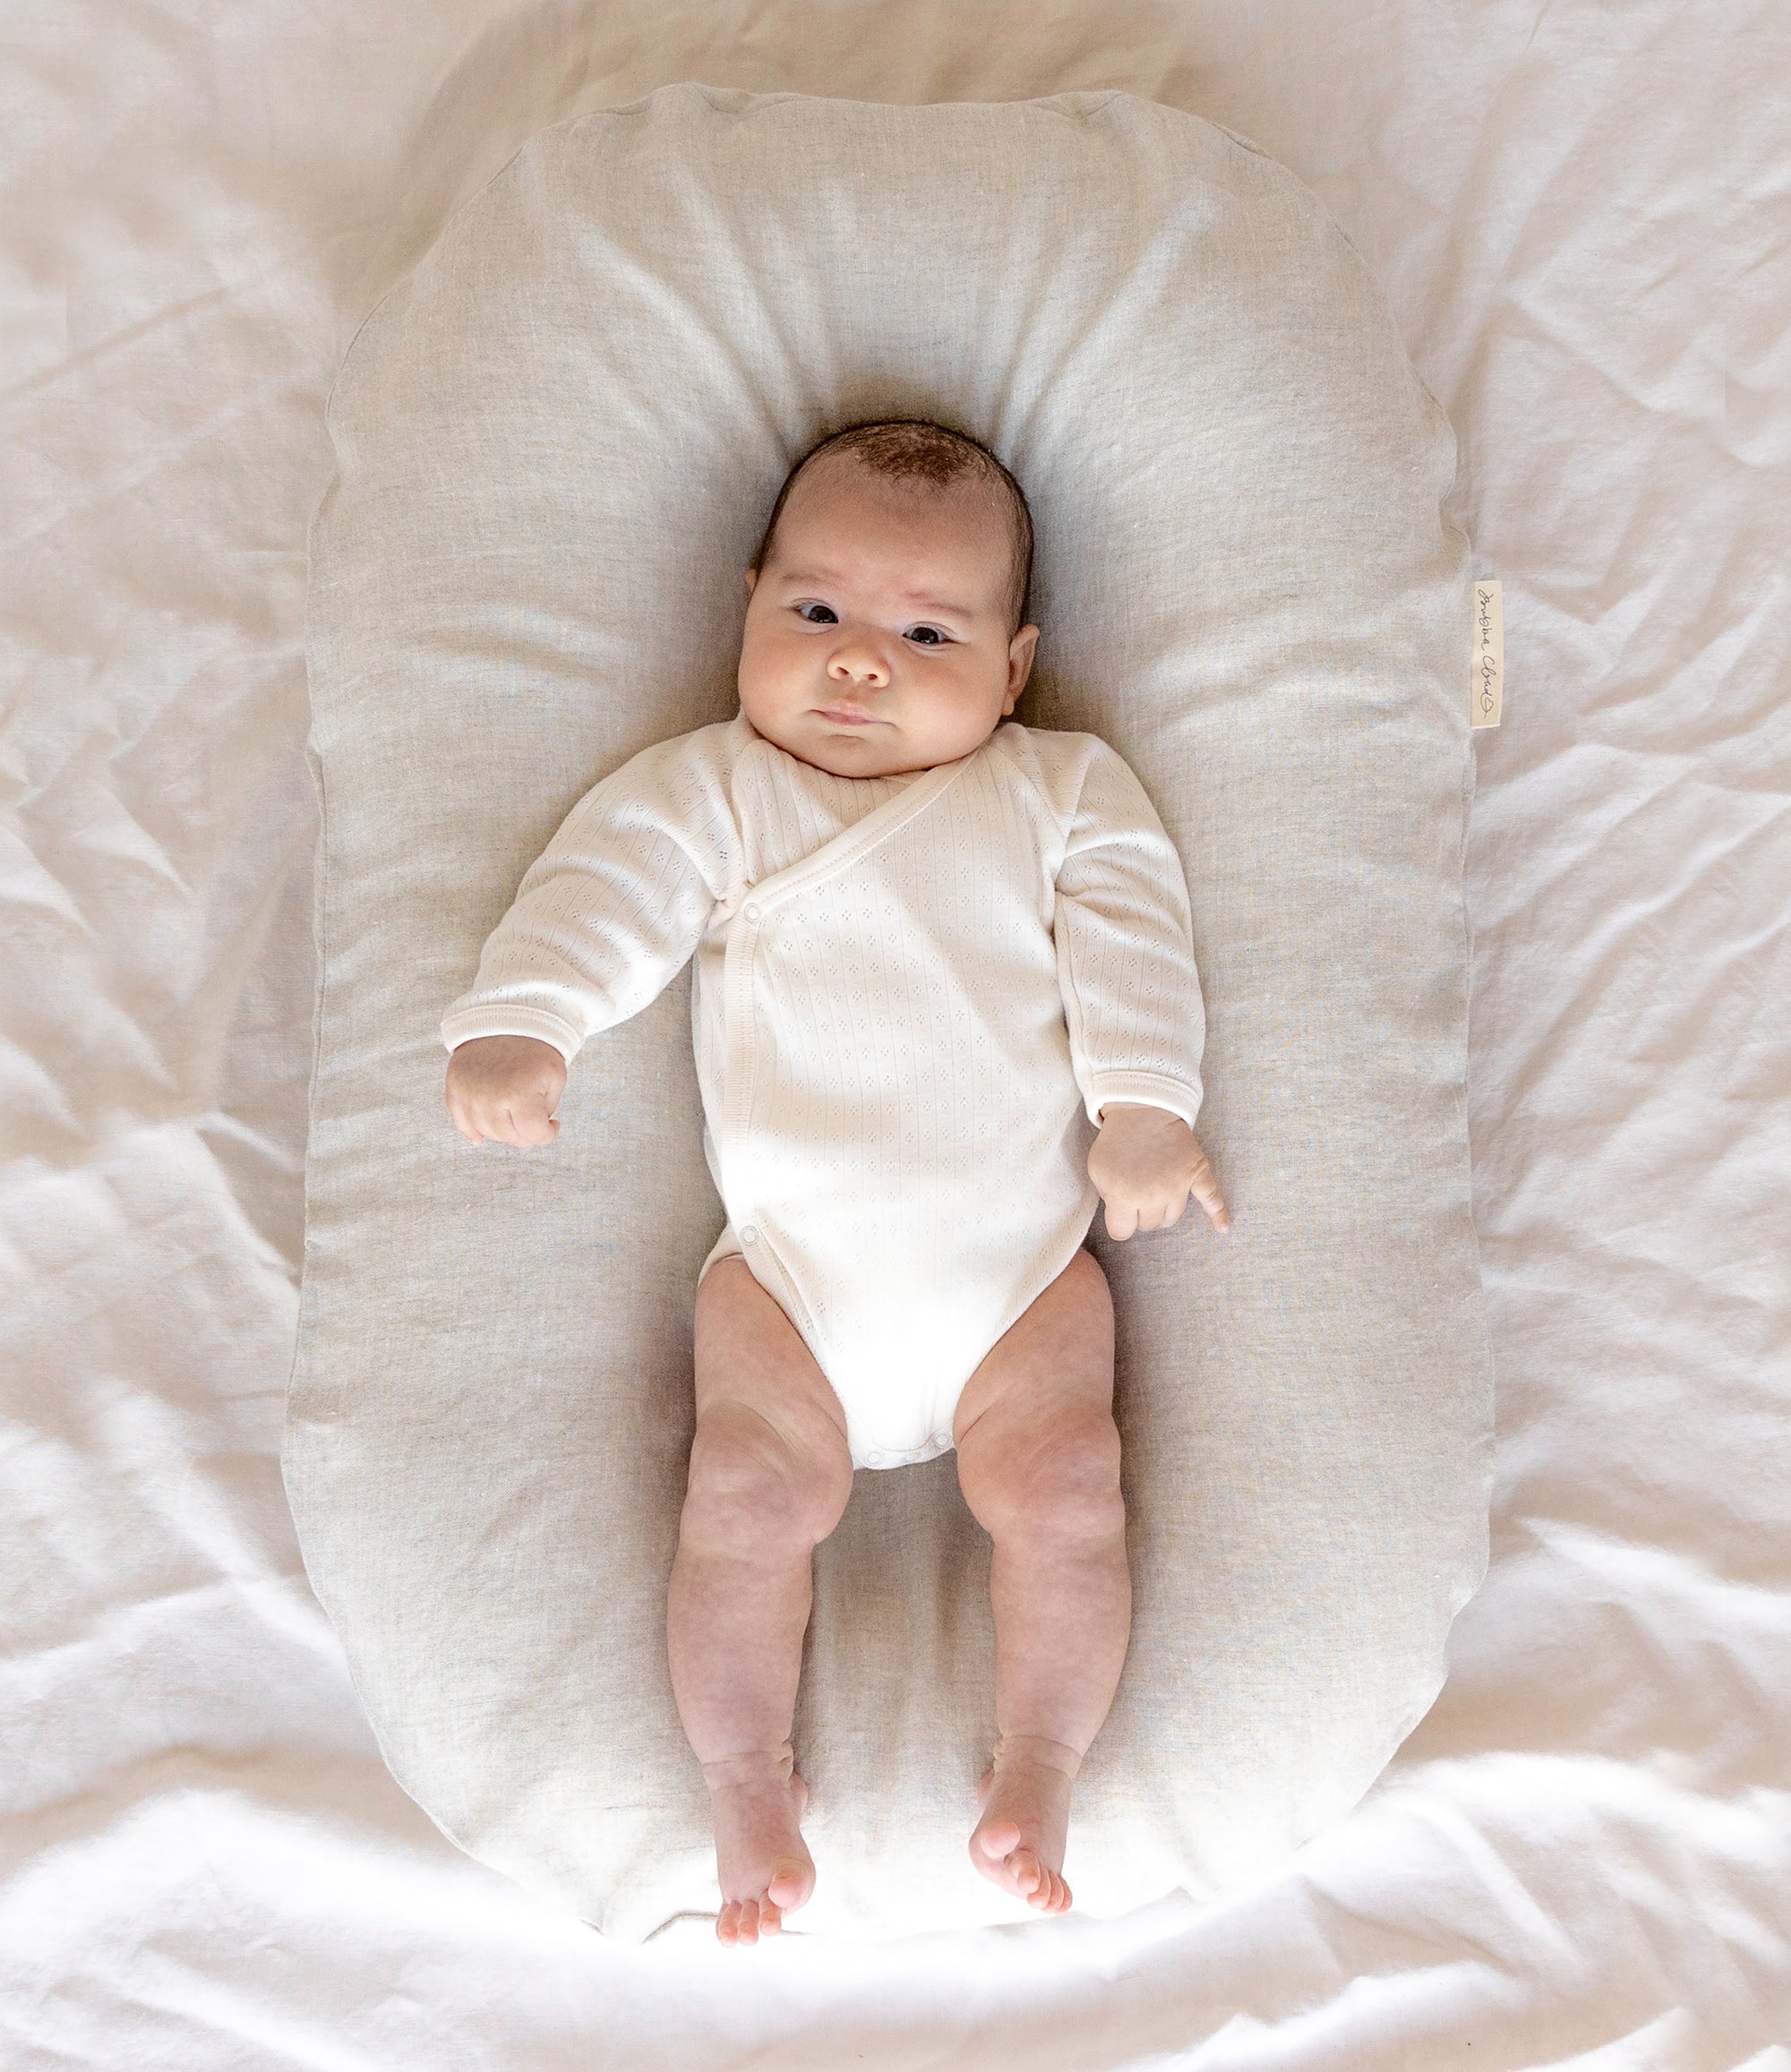 Baby Pictured In The Bubba Cloud Sand Dune Baby Lounger Wearing A White Long Sleeve White Body Suit Looking At The Camera. The Background Is A White Sheet.